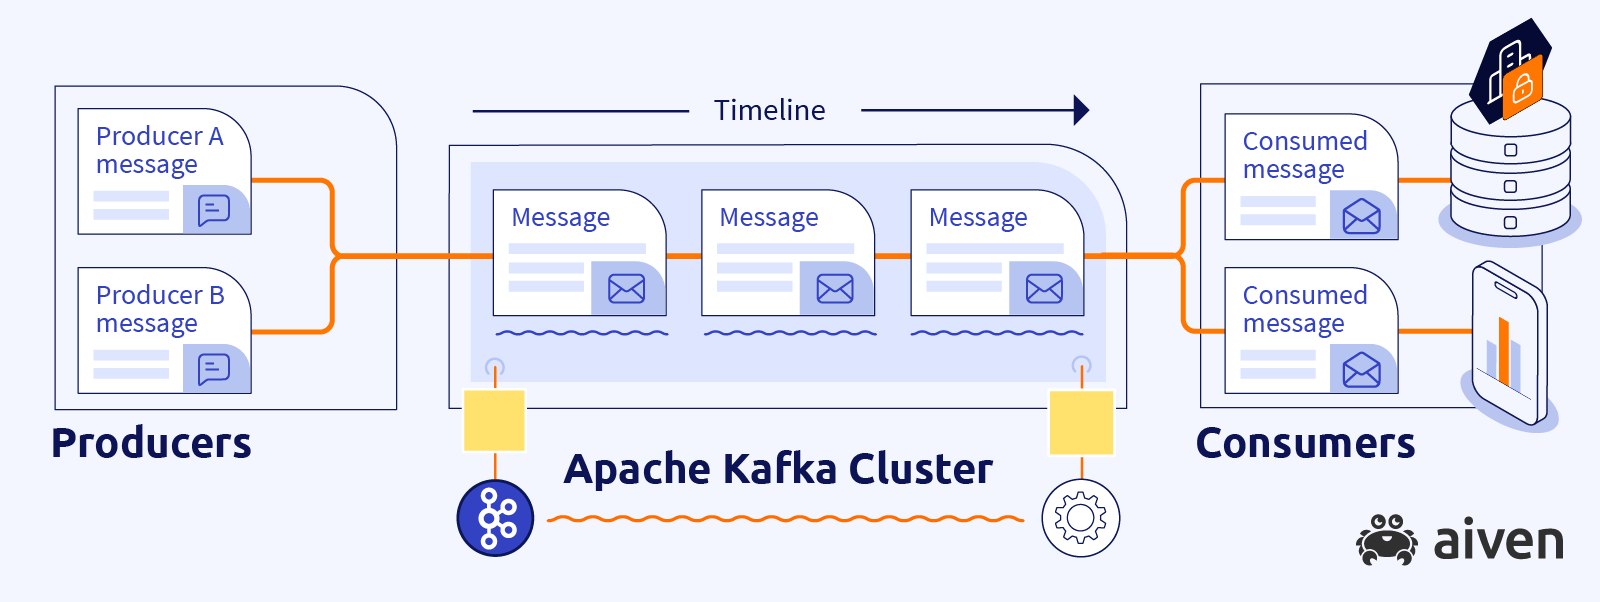 Producer A and Producer B both send messages to the Kafka cluster. There's a timeline of messages inside the cluster. Two consumers, one a database and one a phone app, read messages from the cluster.